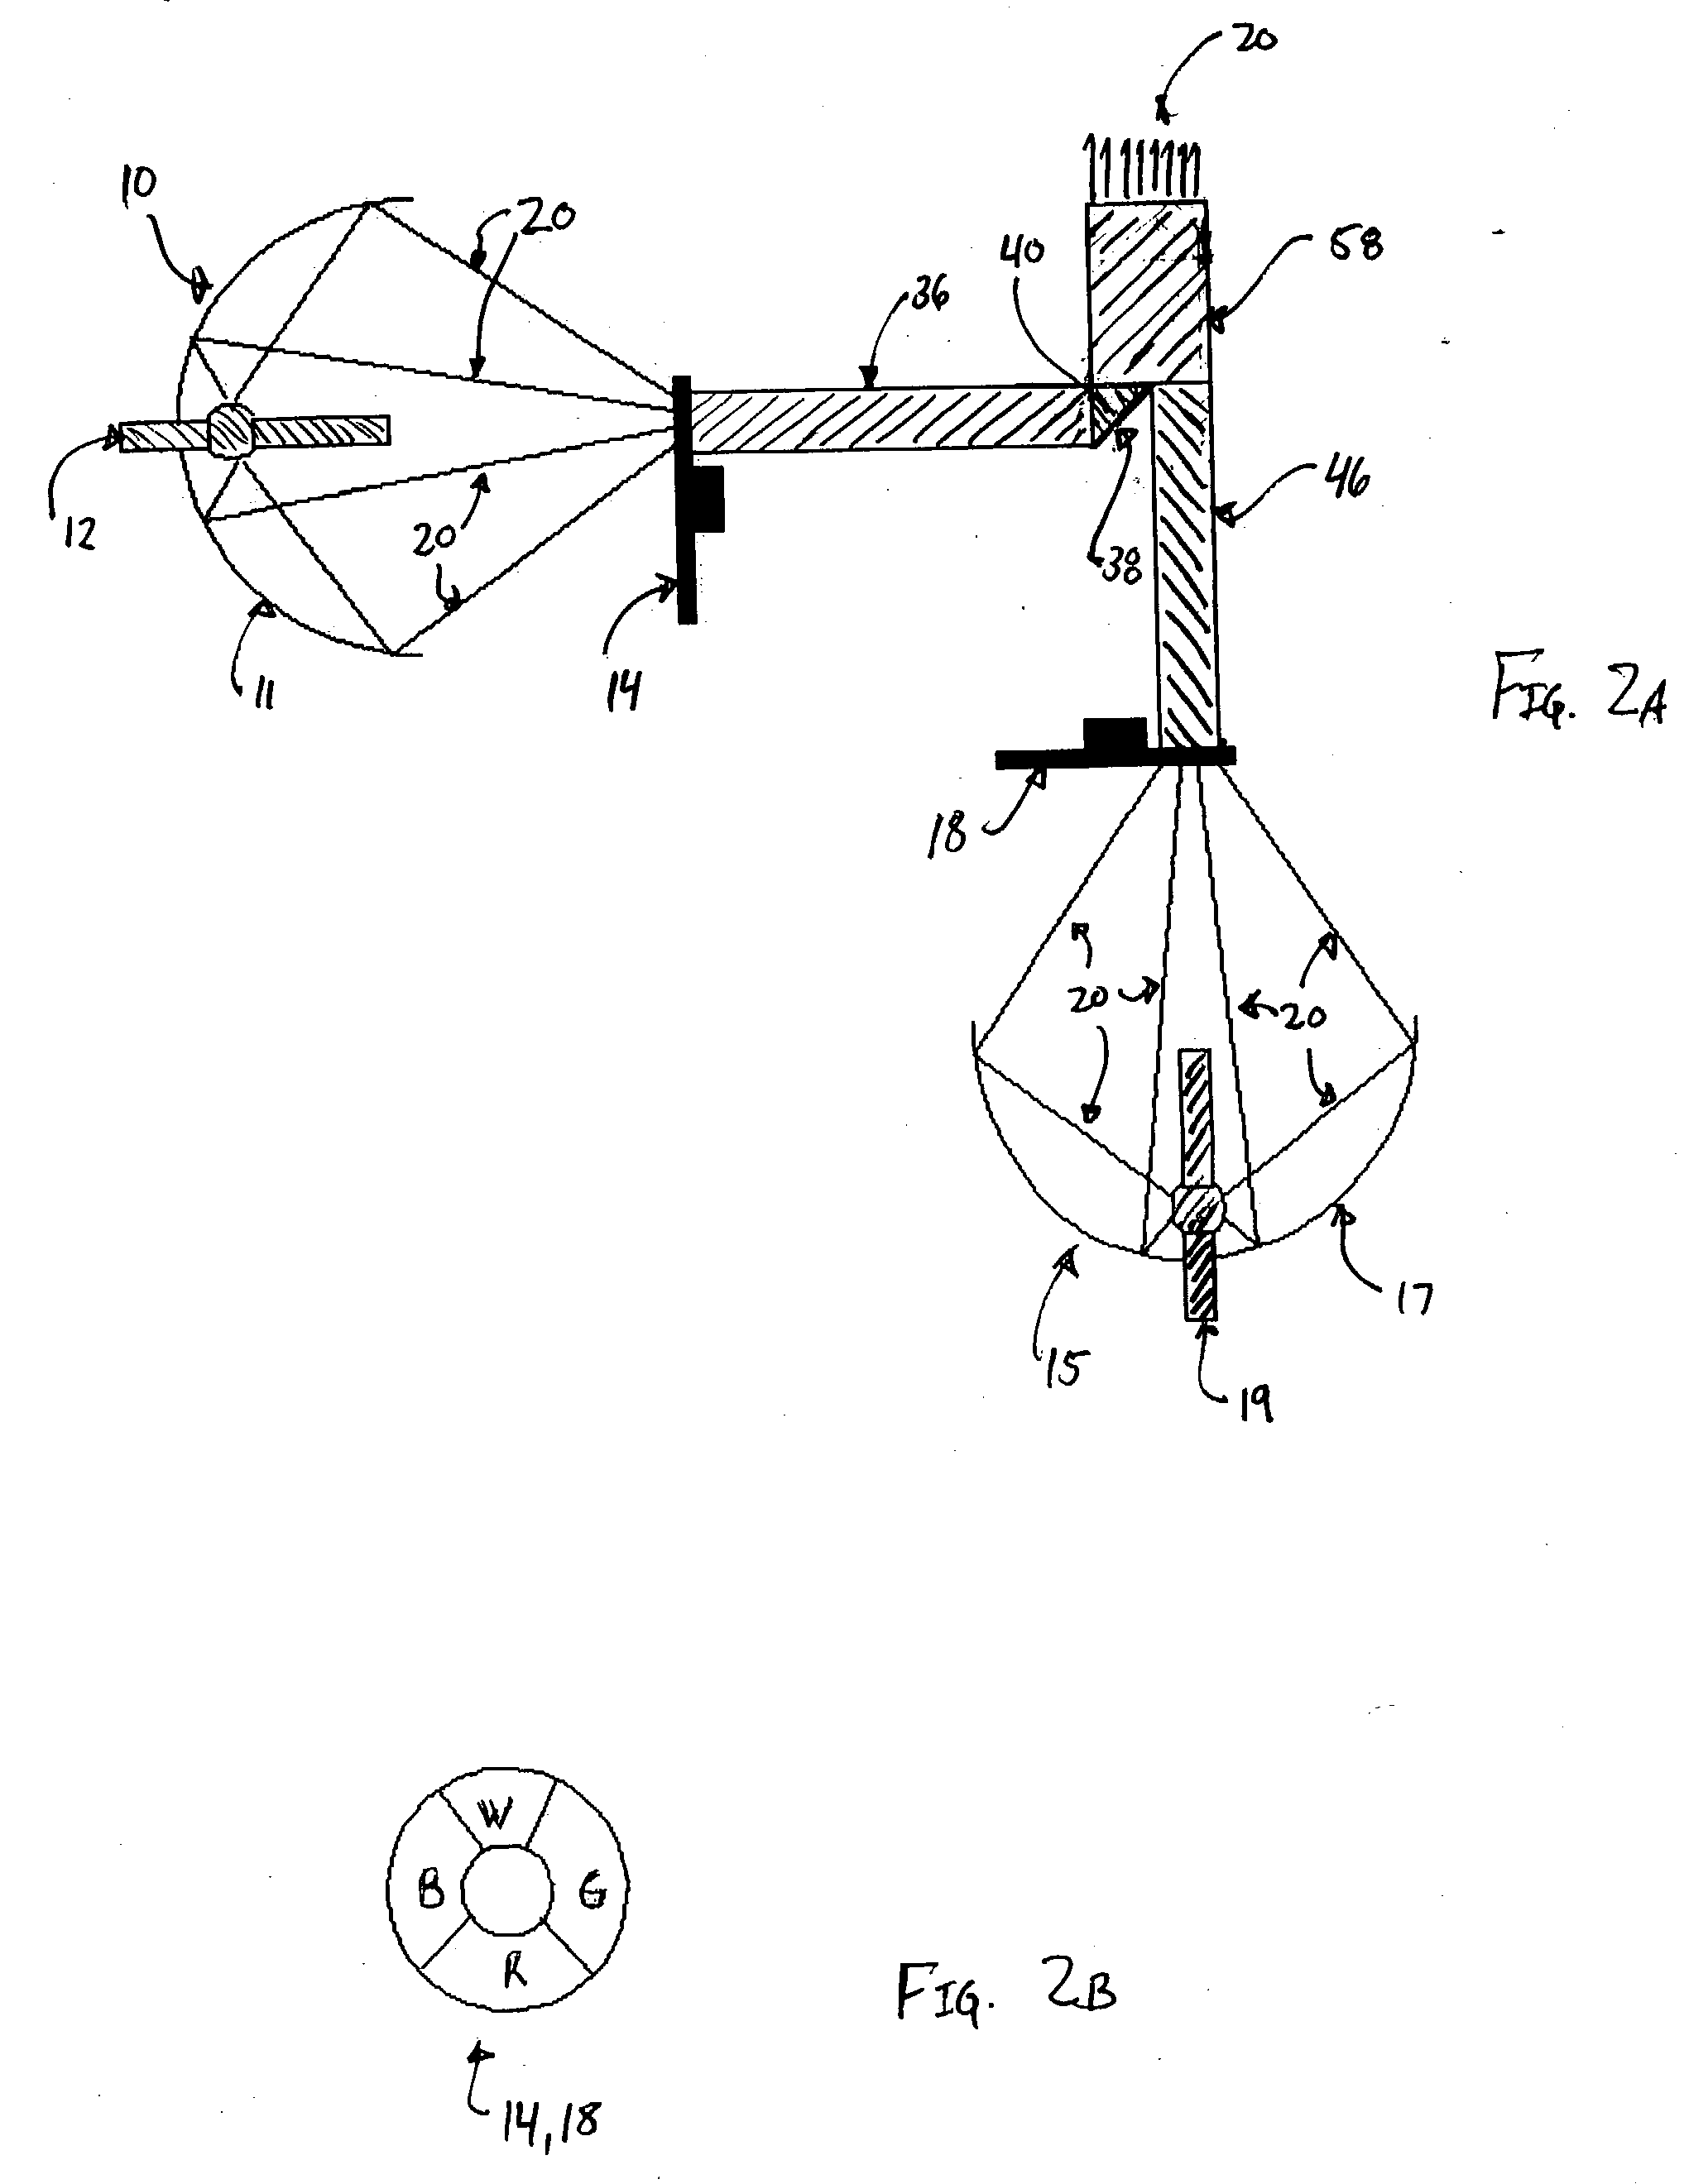 Multi-lamp arrangement for optical systems